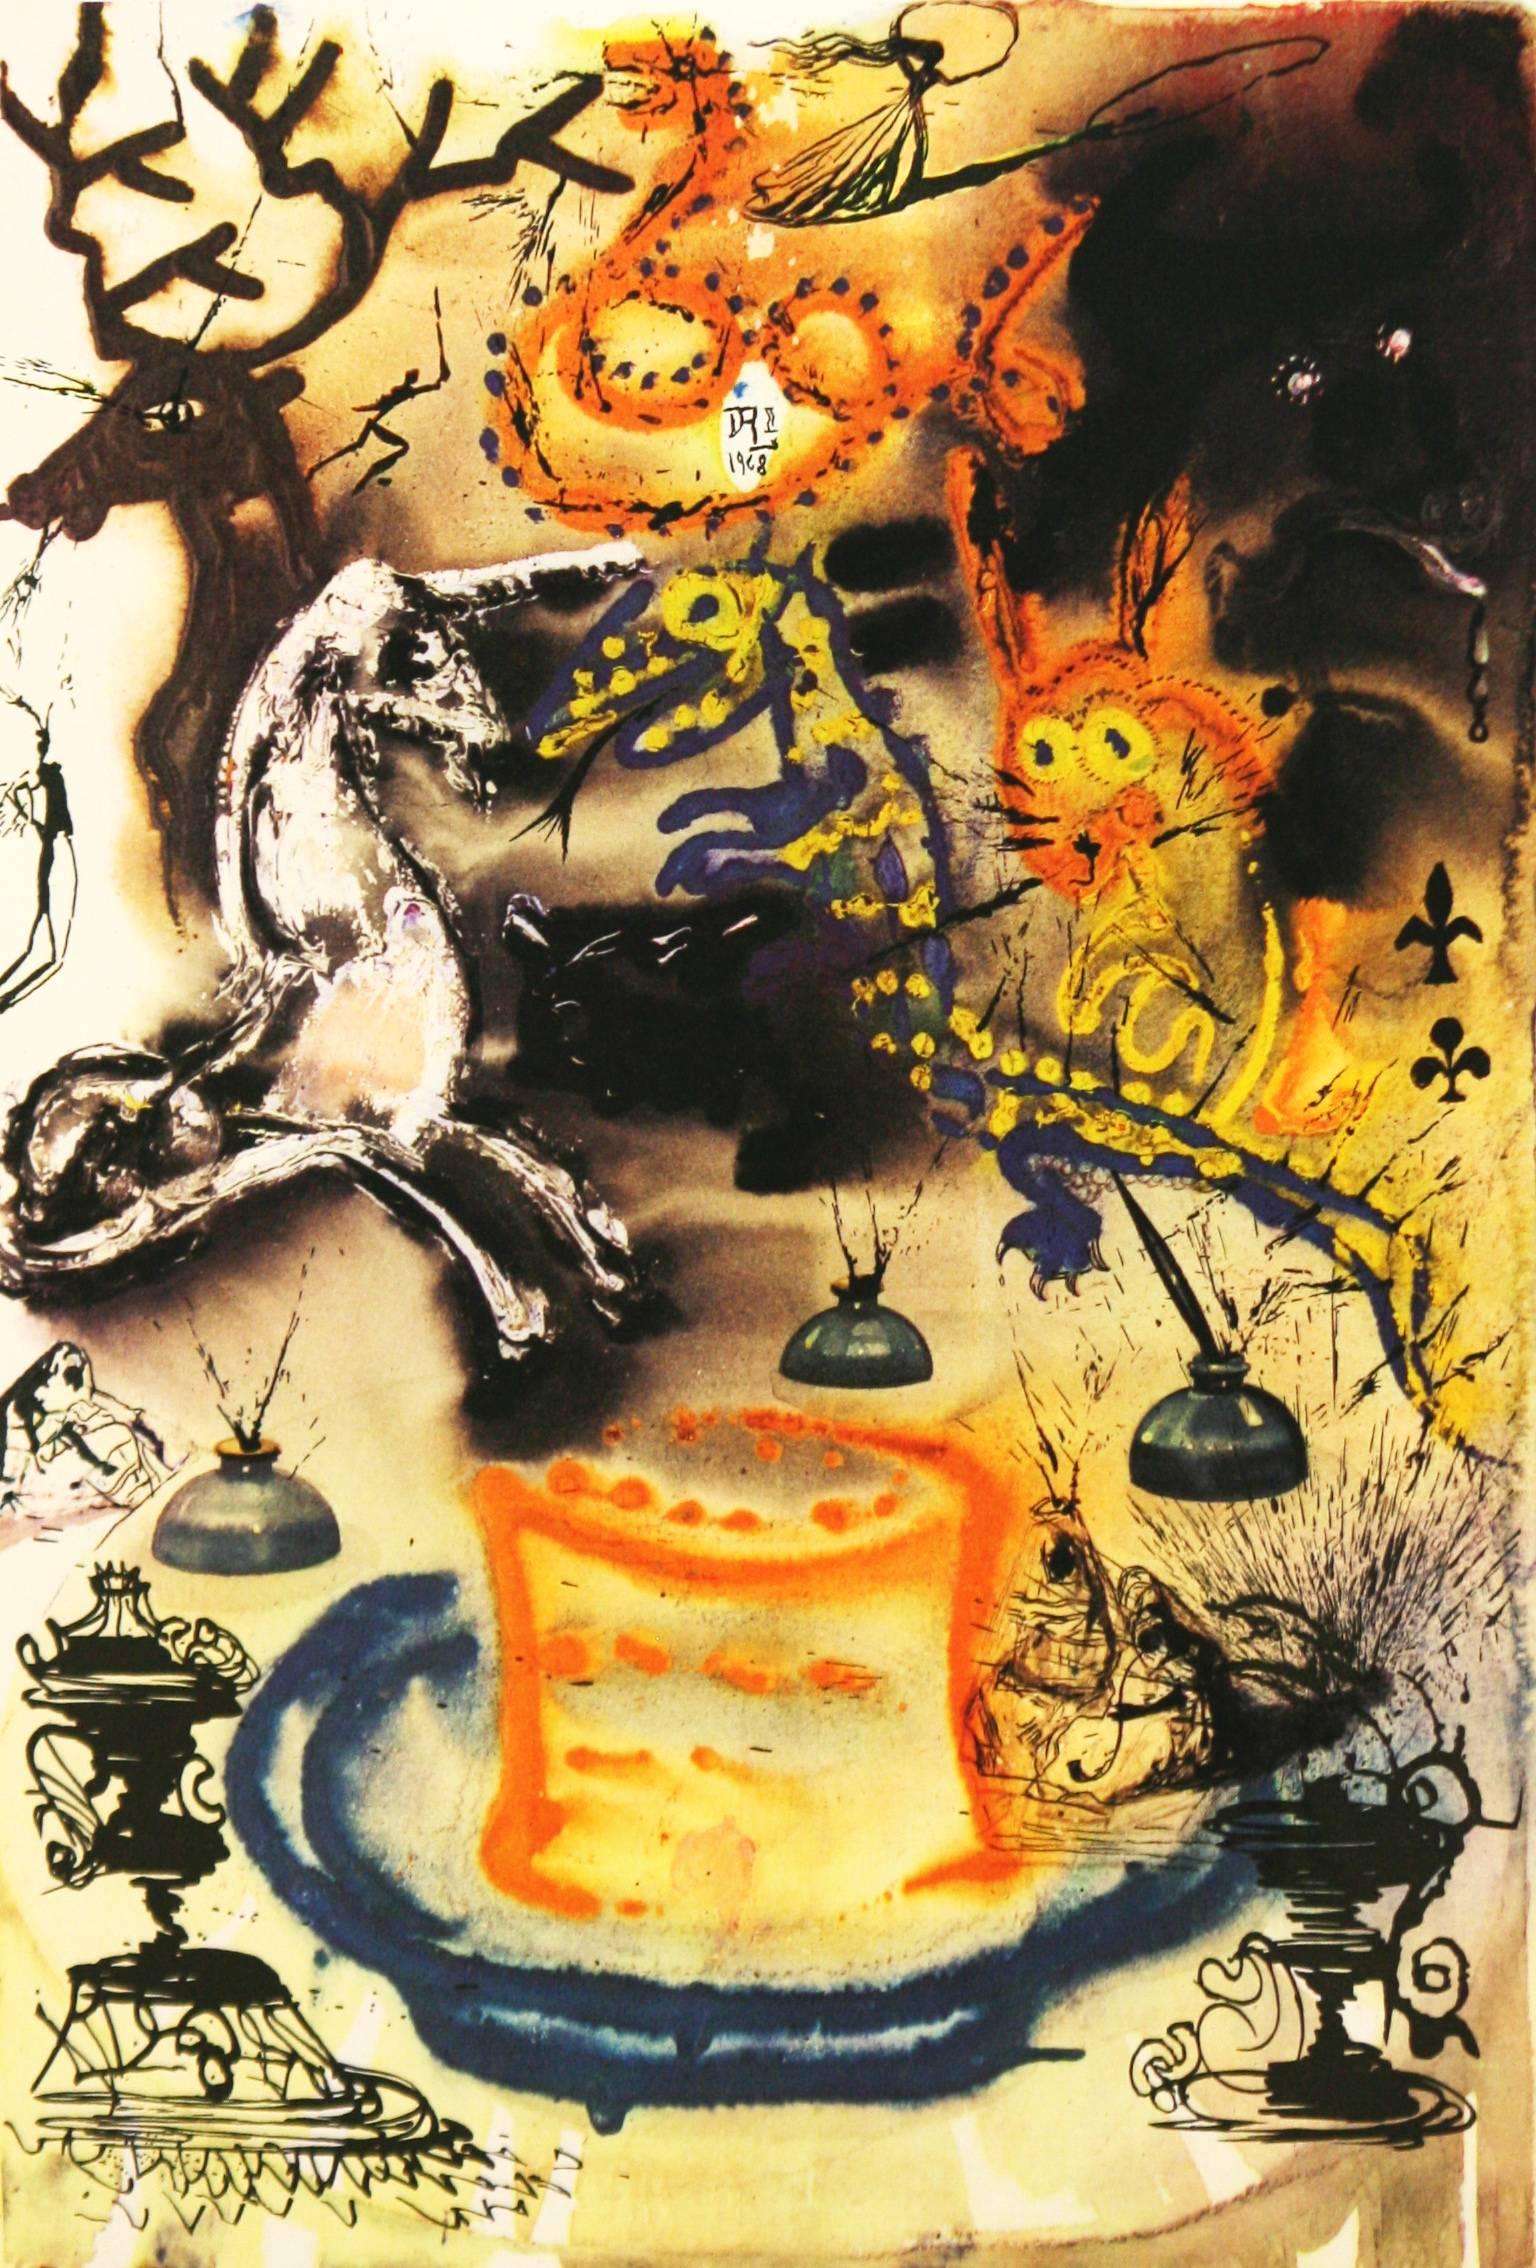 Salvador Dalí Abstract Print - Who Stole the Tarts, from "Alice in Wonderland"